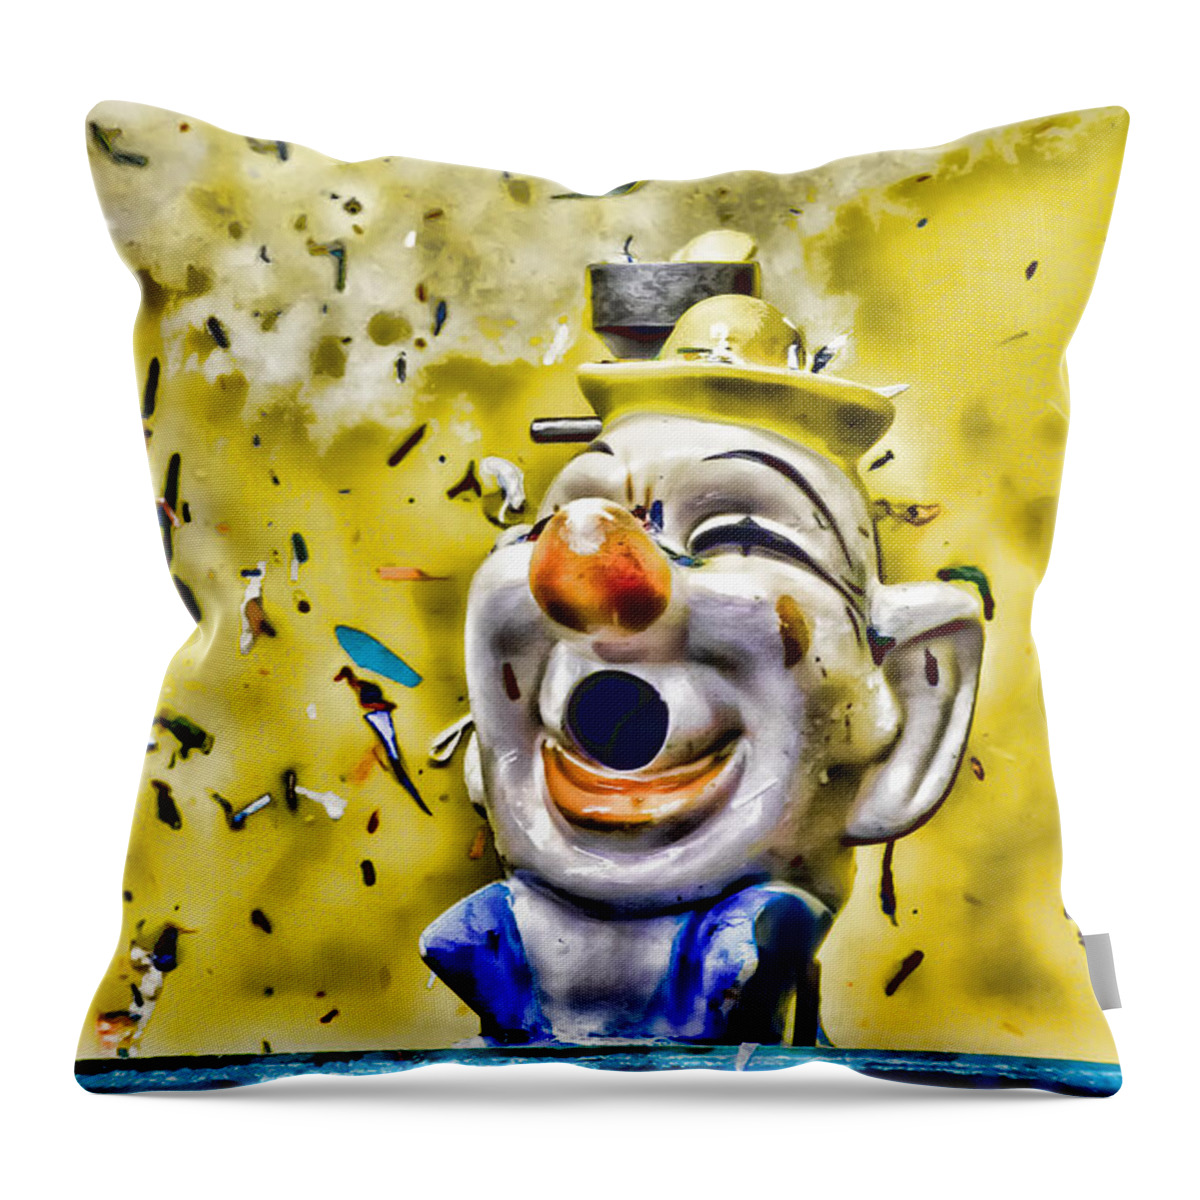 Clowns Throw Pillow featuring the photograph Take Your Best Shot by Colleen Kammerer